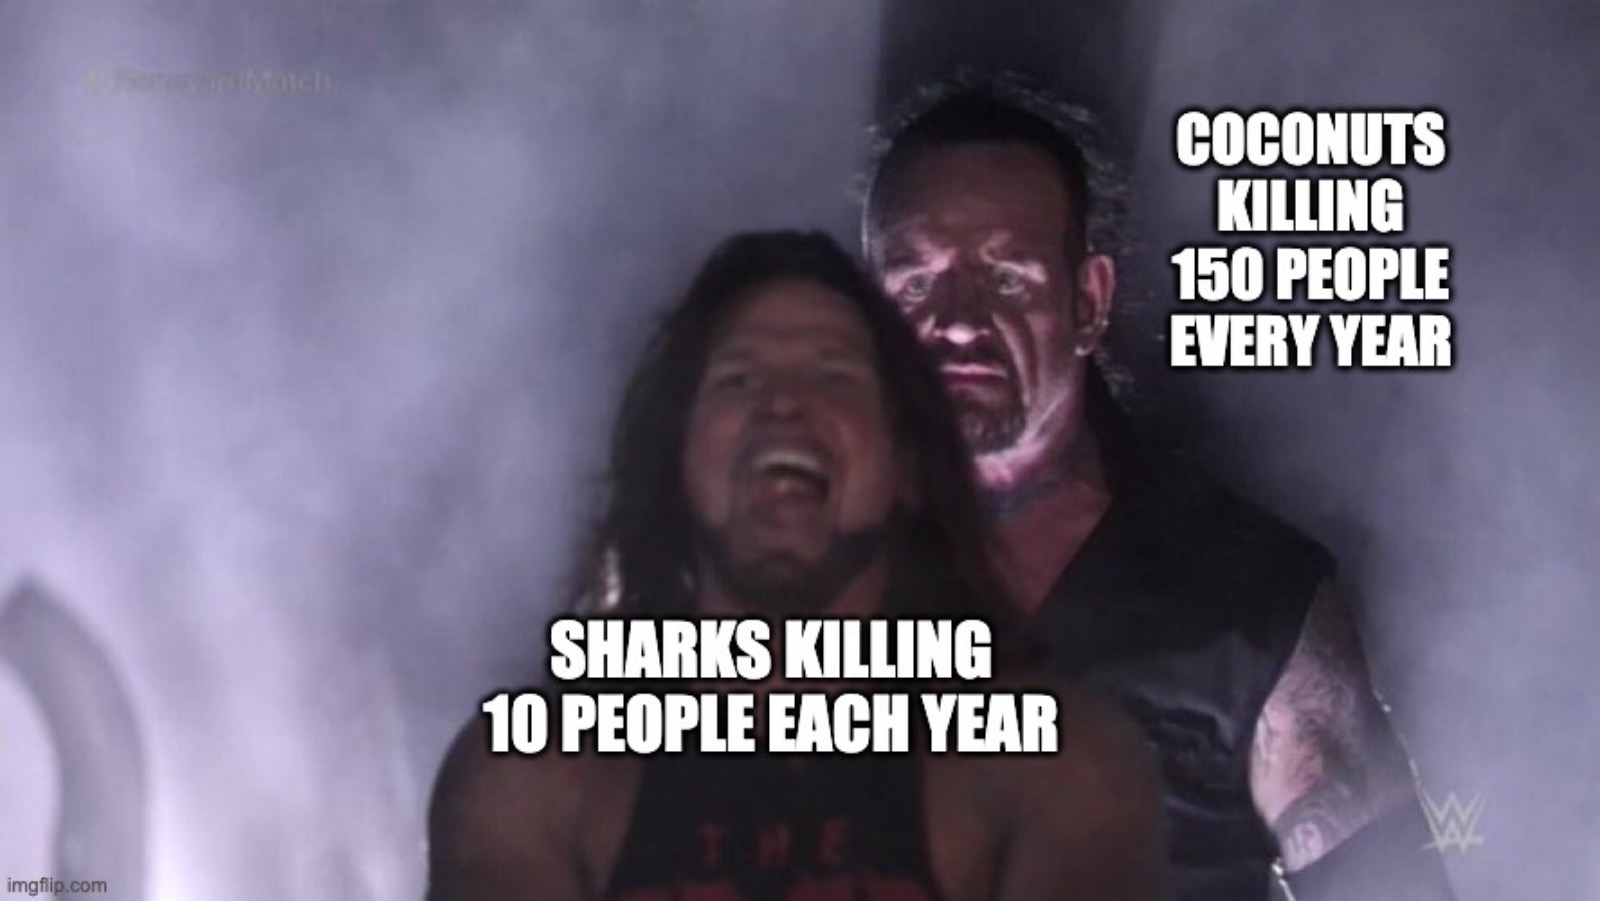 funny meme about sharks vs coconuts